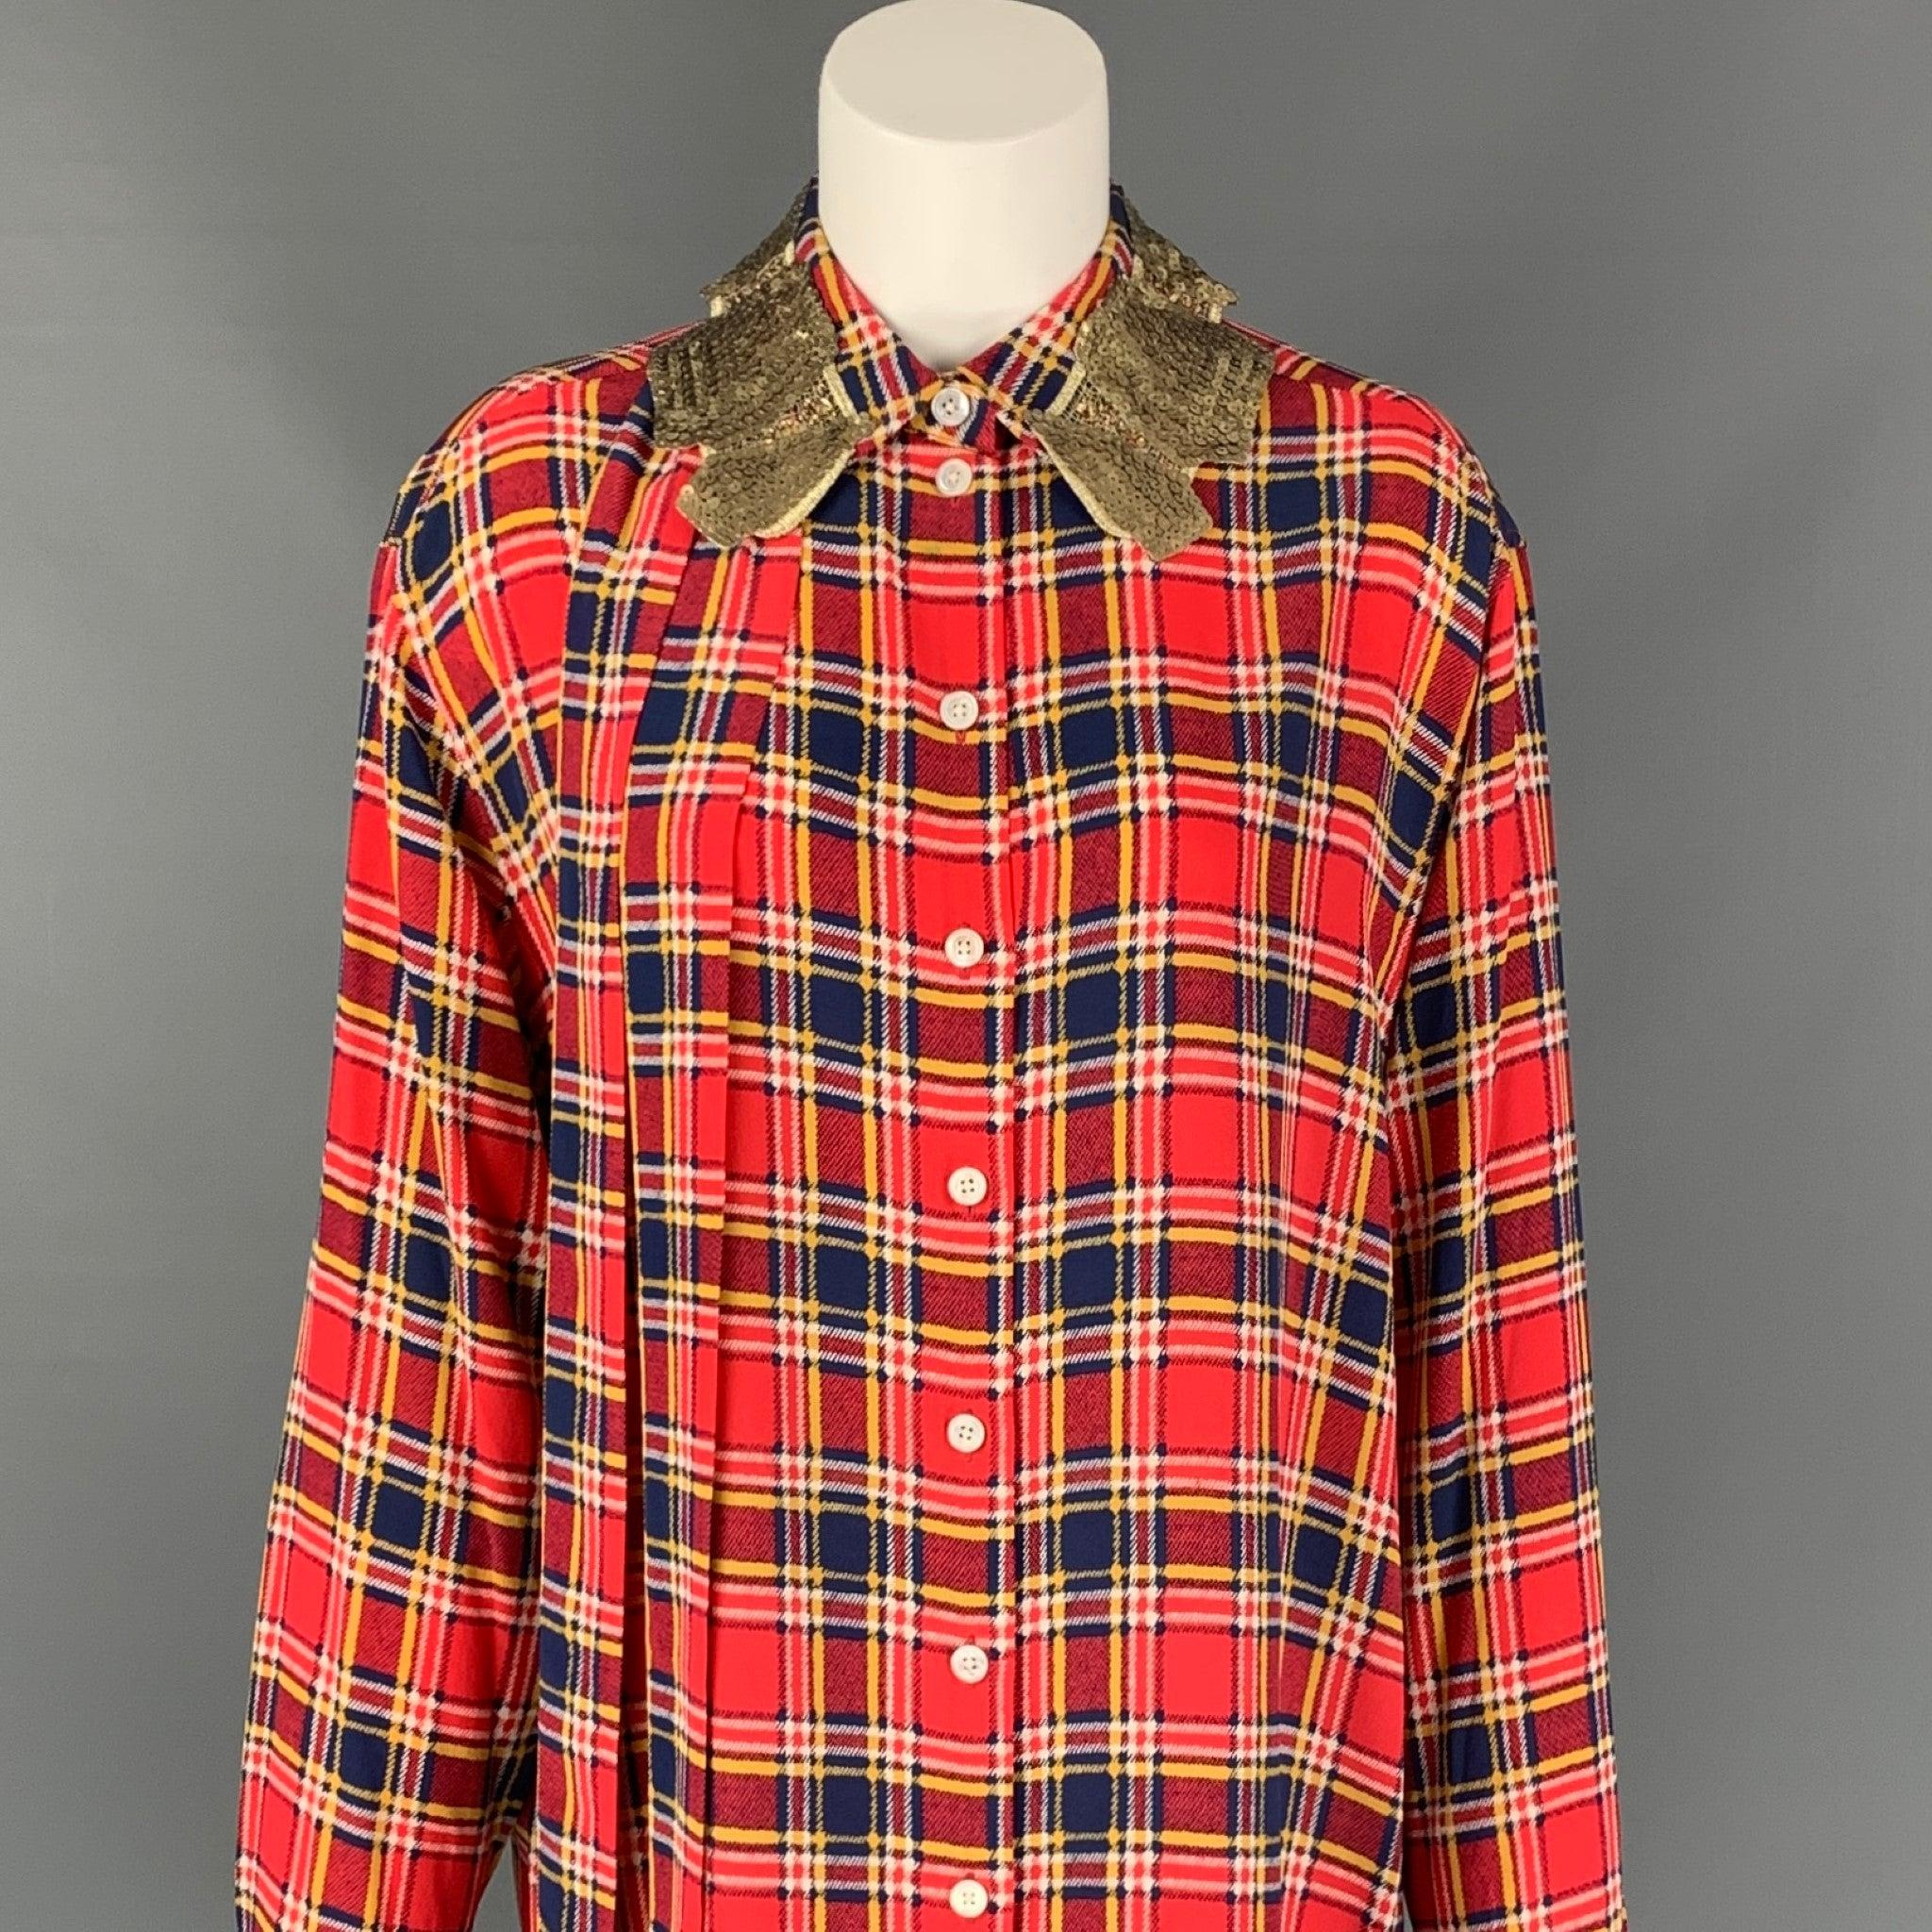 MARC JACOBS long shirt comes in a red & blue plaid silk featuring a loose fit, front bow design, sequined collar, and a buttoned closure.
Excellent
Pre-Owned Condition. 

Marked:   4 

Measurements: 
 
Shoulder: 18.5 inches  Bust: 44 inches 